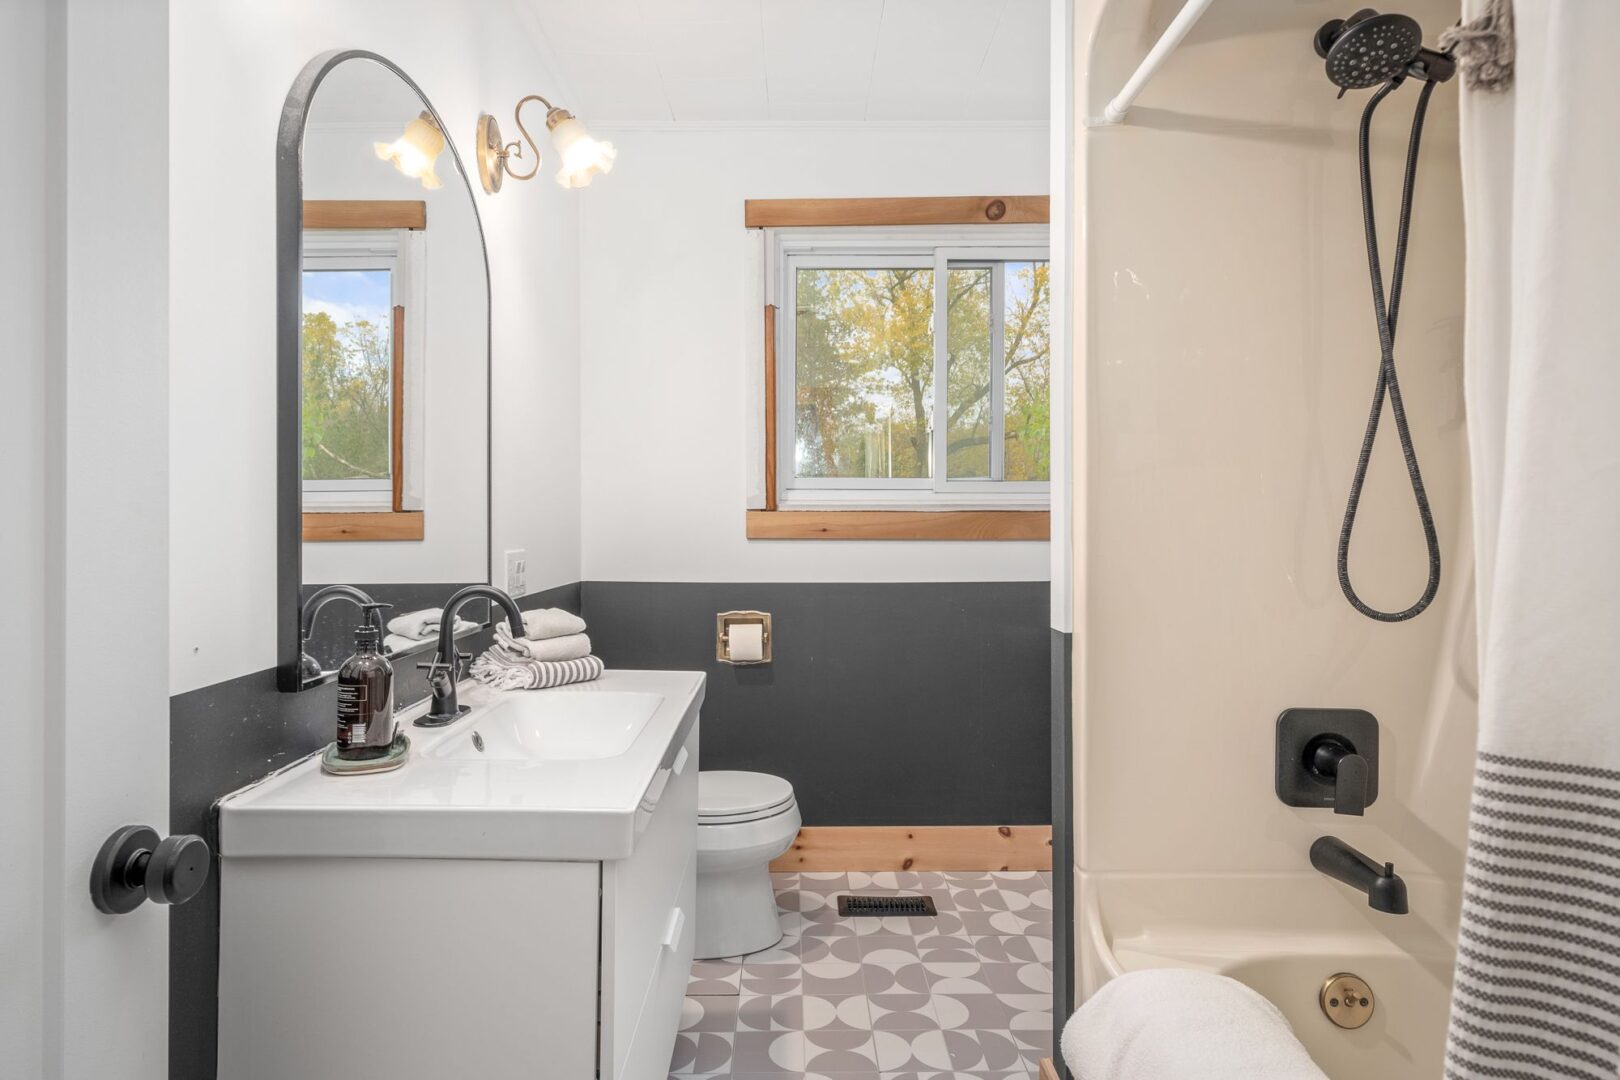 A big bathroom with patterned tiled floors, a toilet, a sink, and a shower-tub combo.